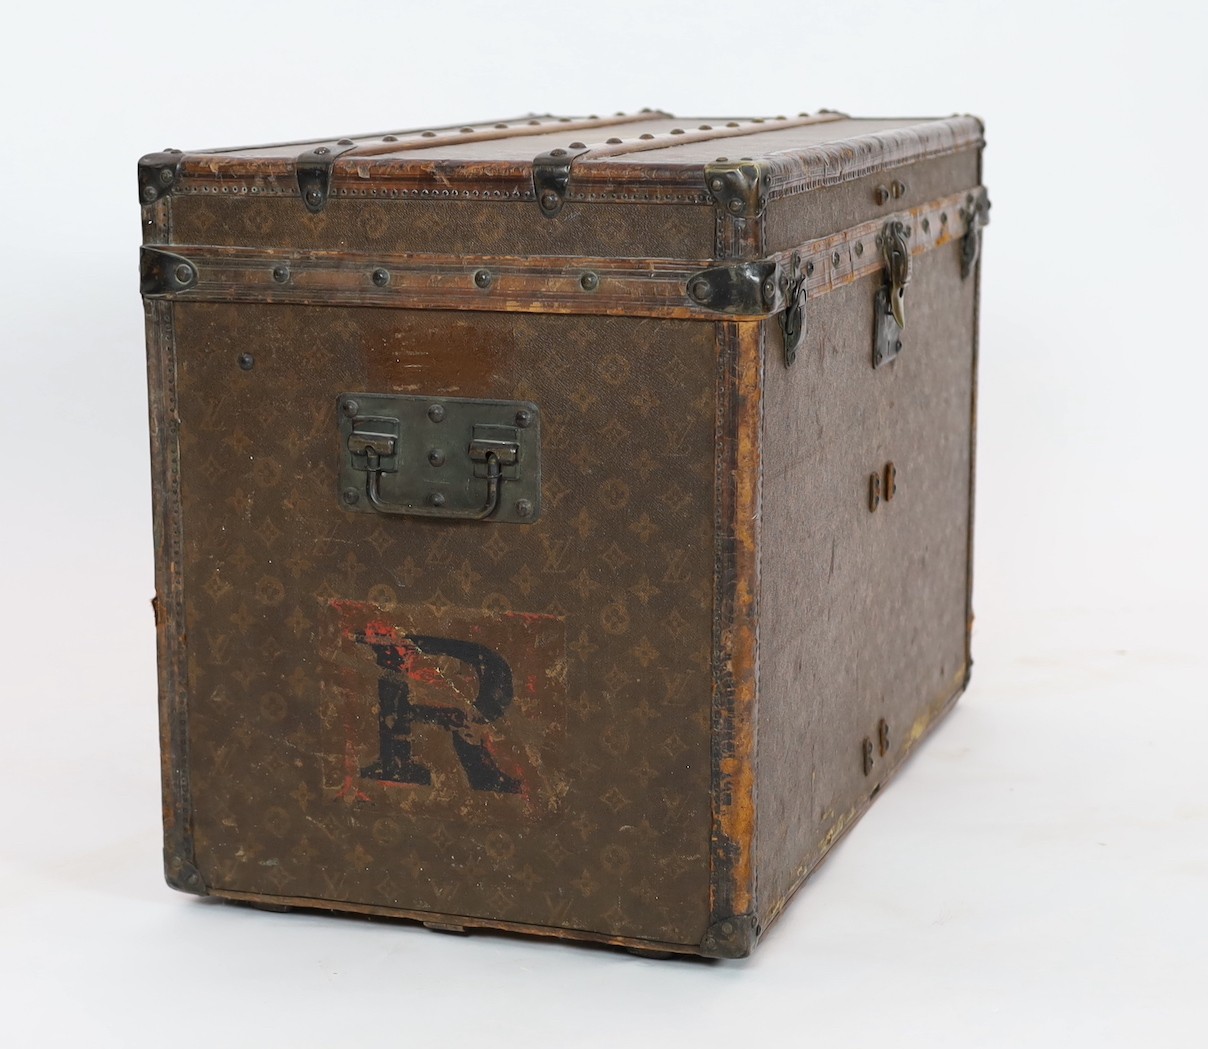 A Louis Vuitton brass mounted leather bound trunk, c.1910, numbered 137426, with LV covering and - Image 4 of 7